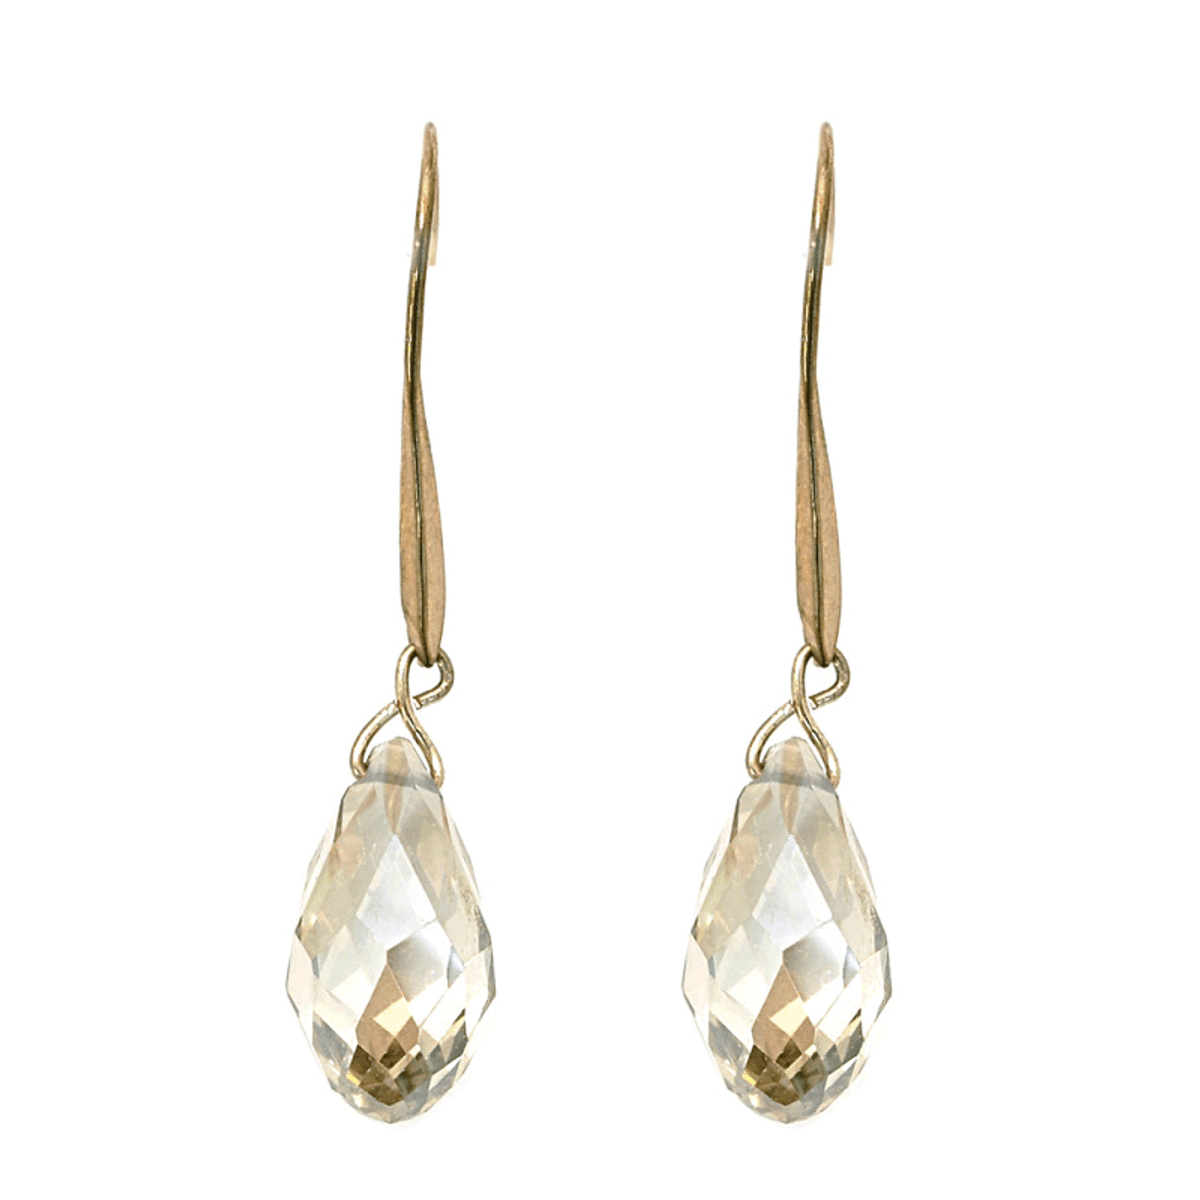 Anat Collection | Earrings - Tear Drop Crystal